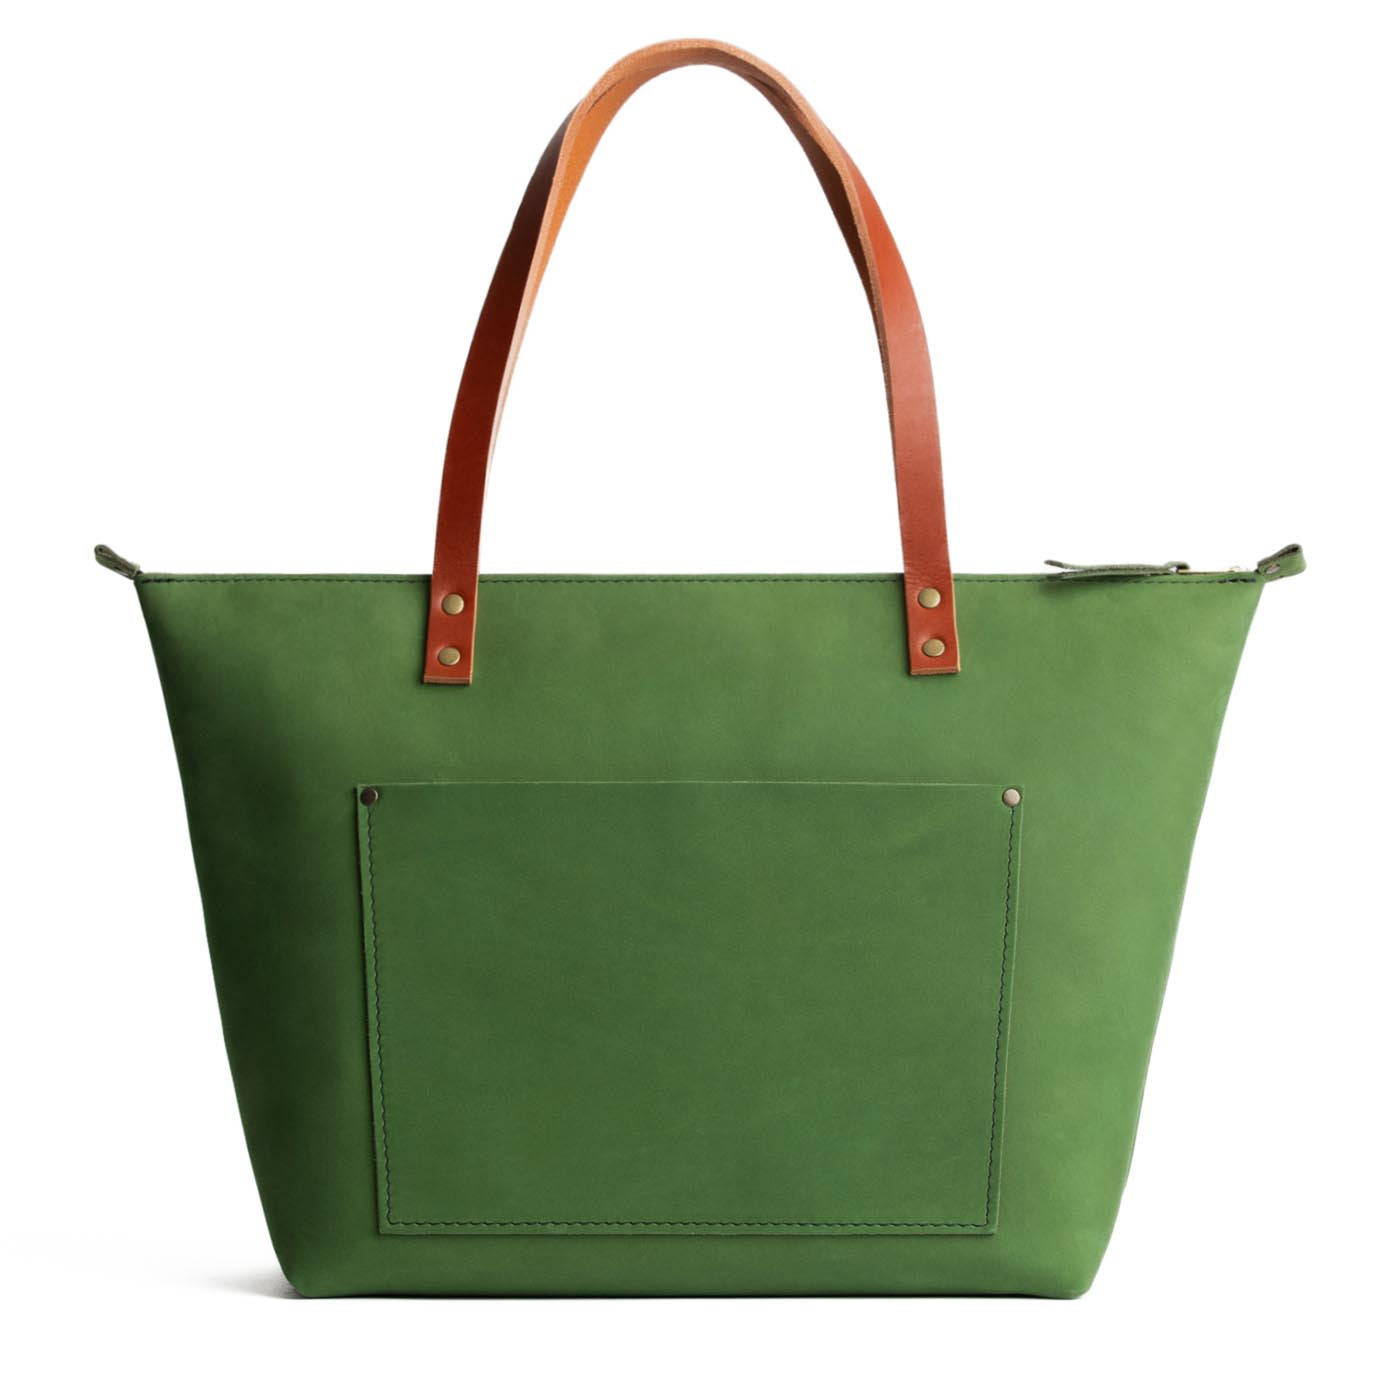 Succulent*Zipper | Large zipper leather tote bag with sturdy bridle handles and front pocket